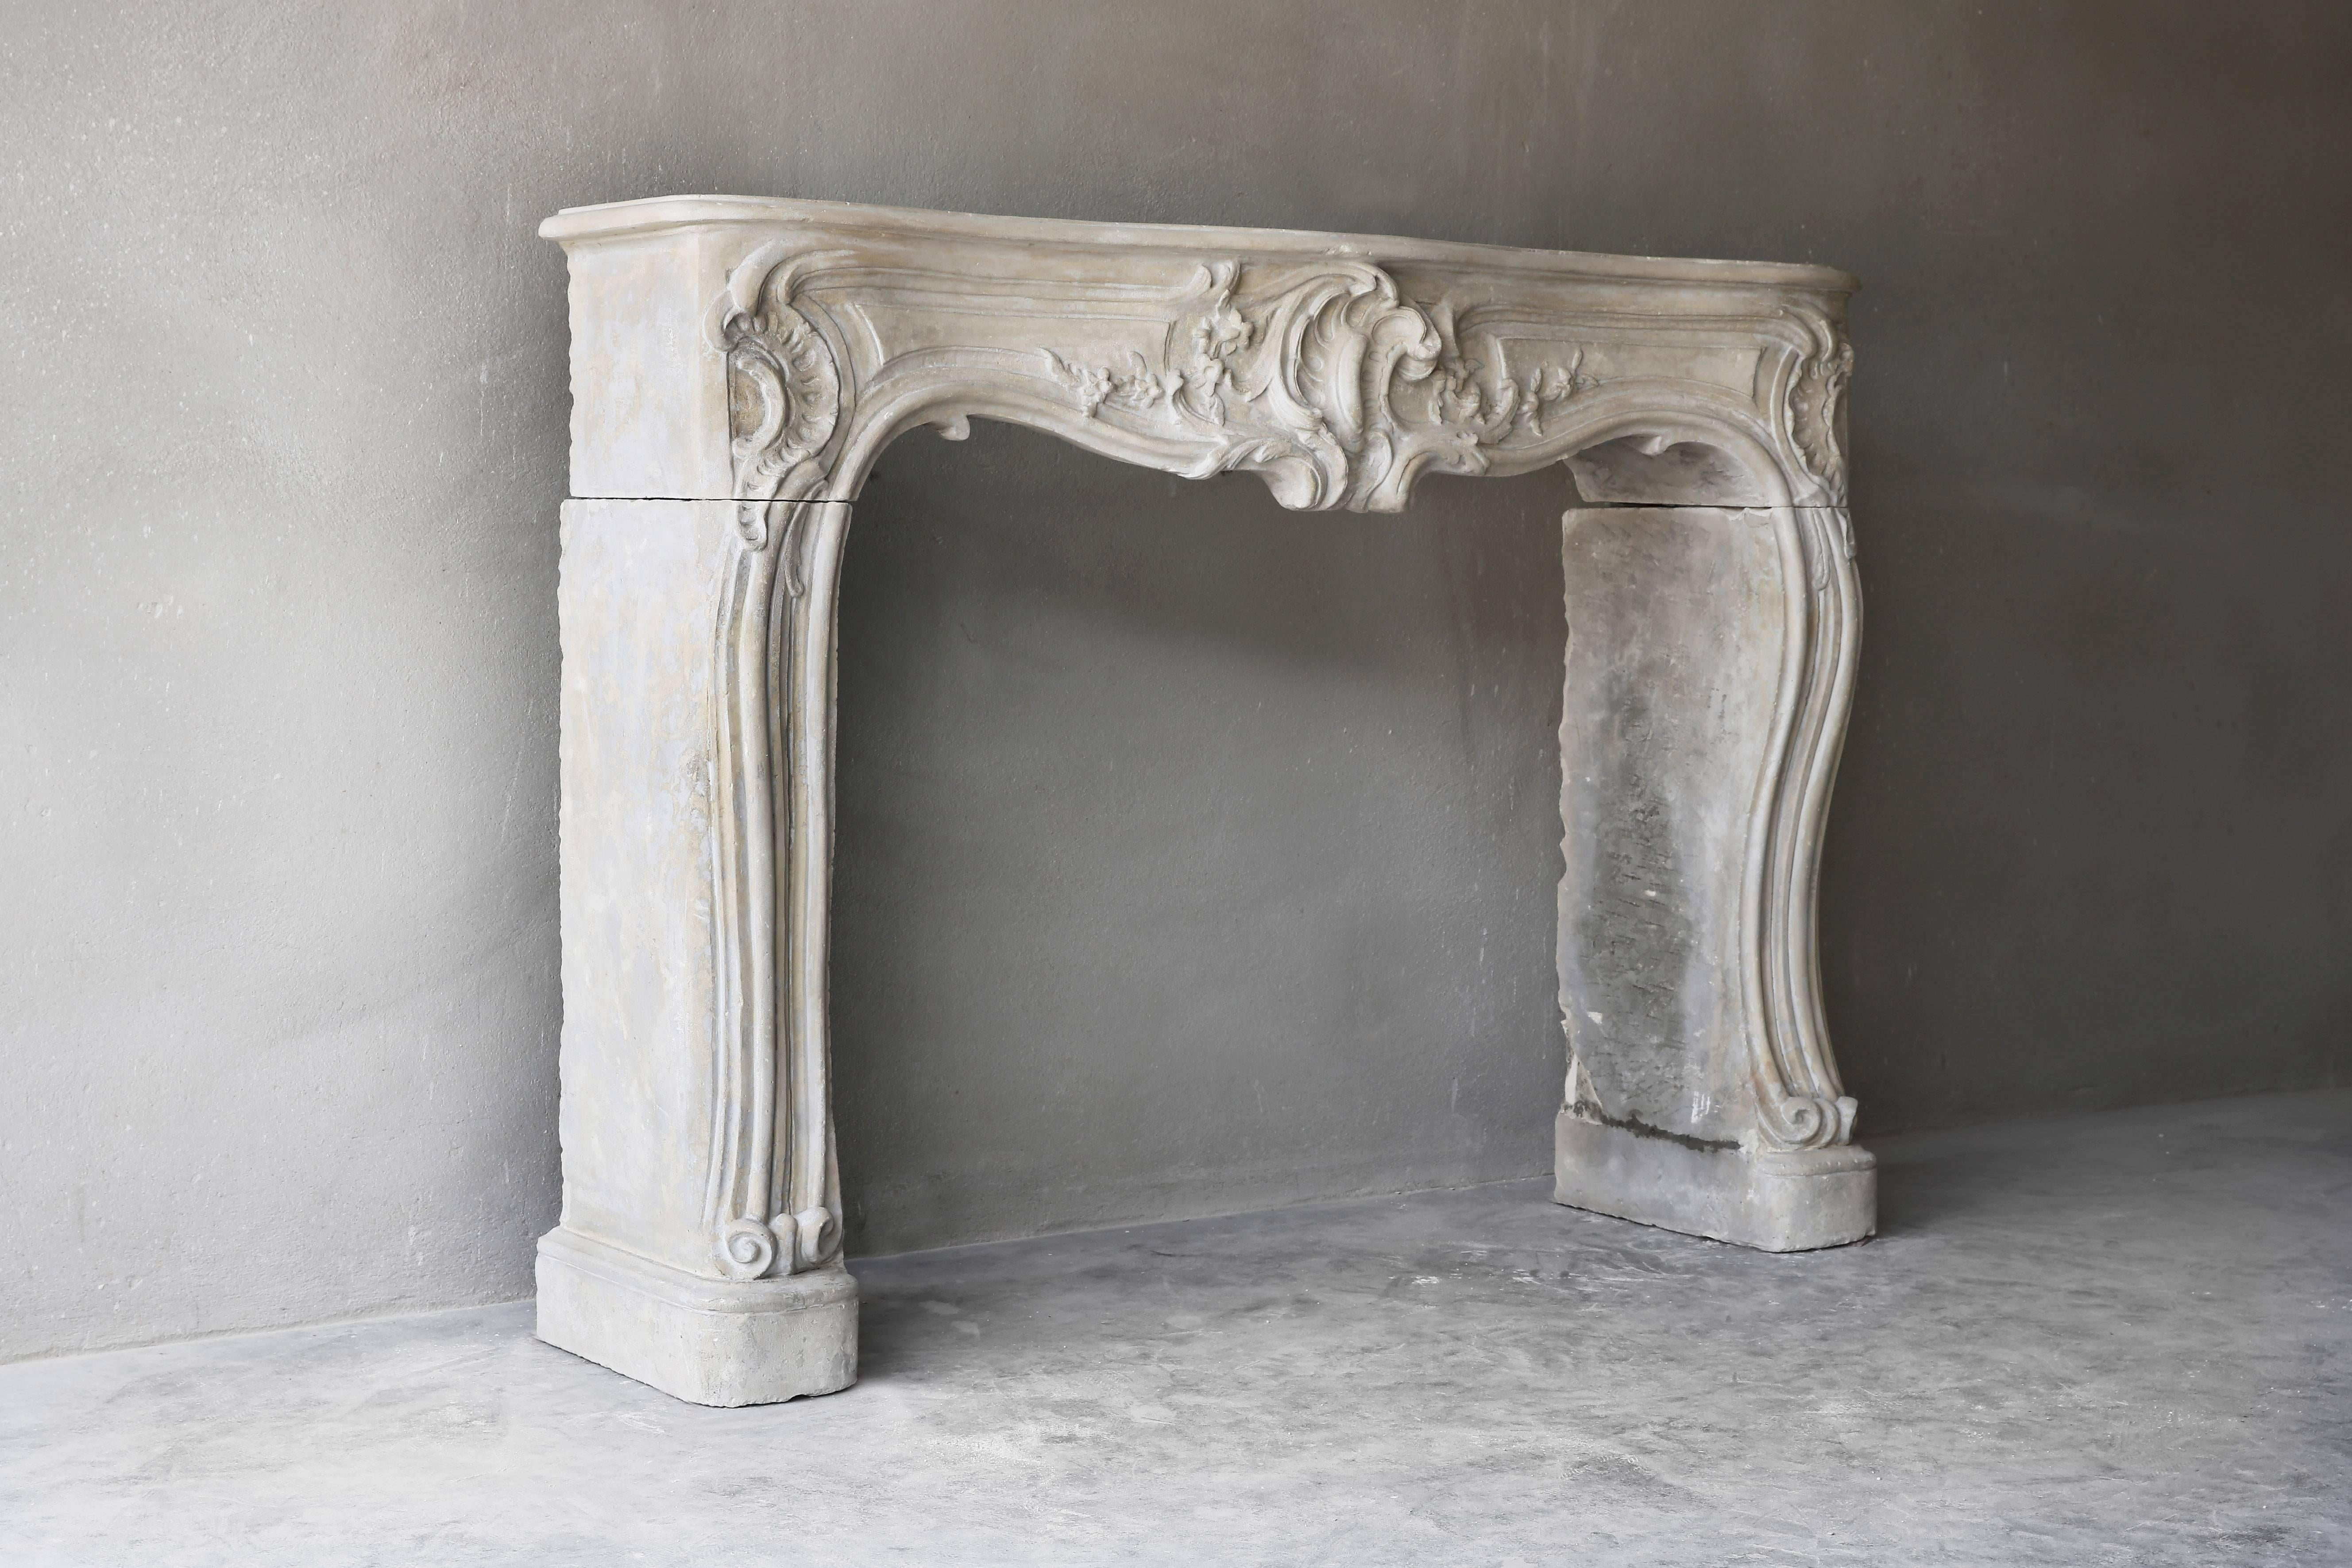 A beautiful antique chimney of French limestone in the style of Louis XV. This chimney comes from a chic Parisian apartment and has beautiful treatments on the front and legs. Characteristic of Louis XV are the scallops and decorations that make